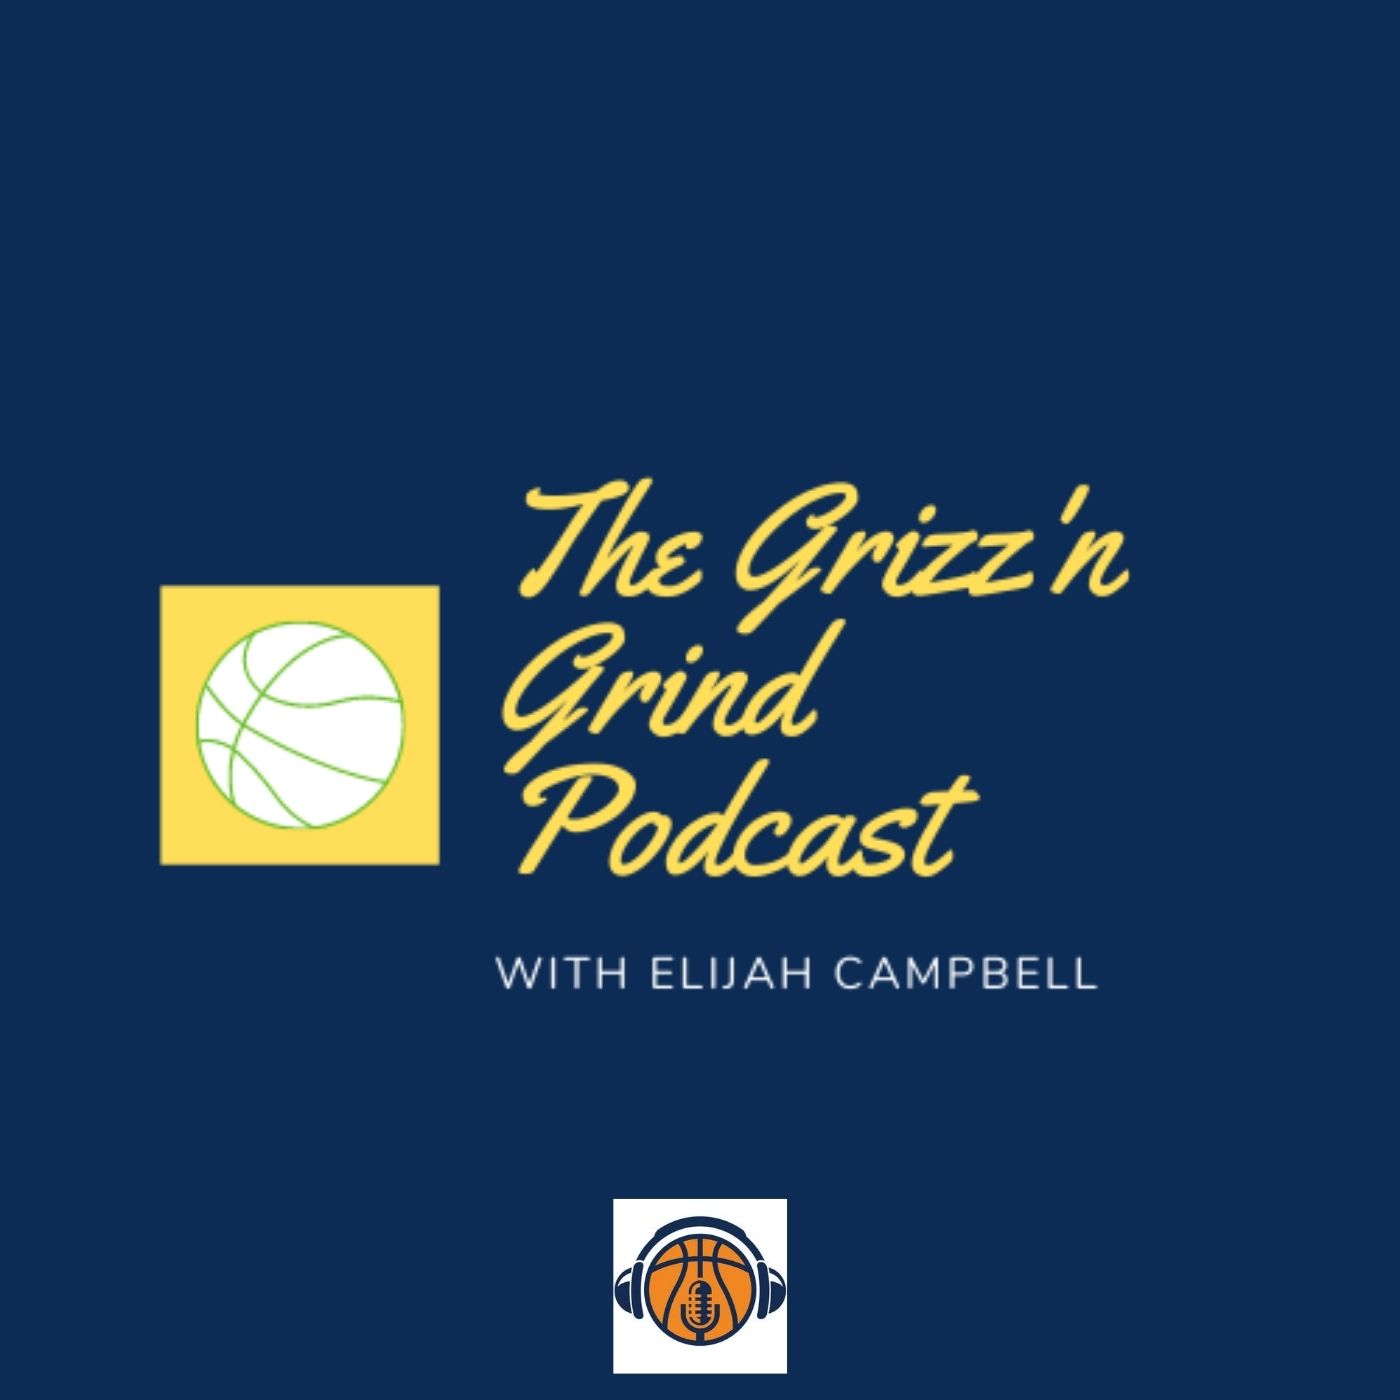 Artwork for podcast Grizz n Grind